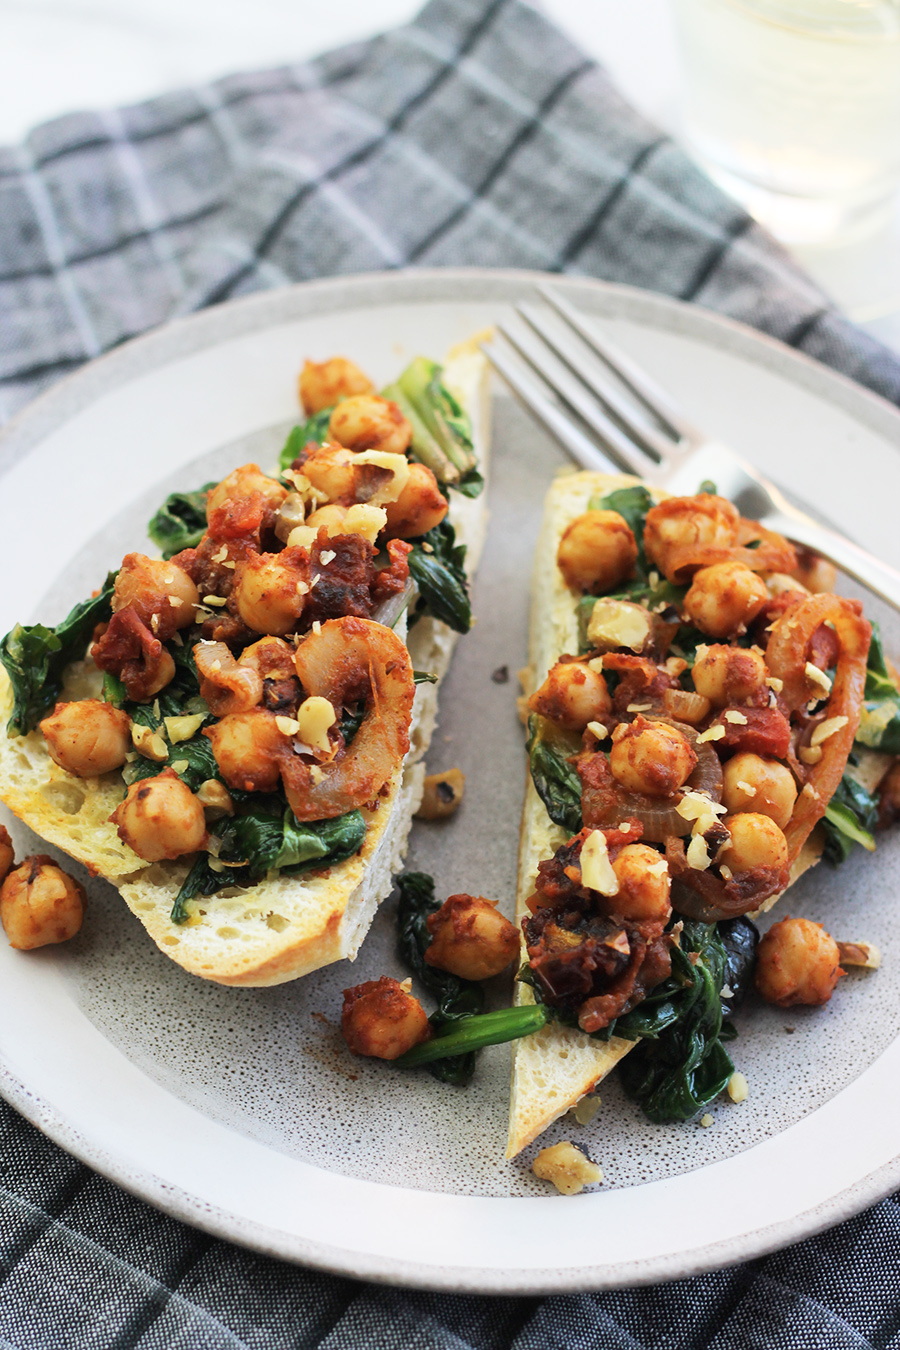 Ciabatta garlic toast with sauteed greens and chickpeas on top with a glass of wine in the background.